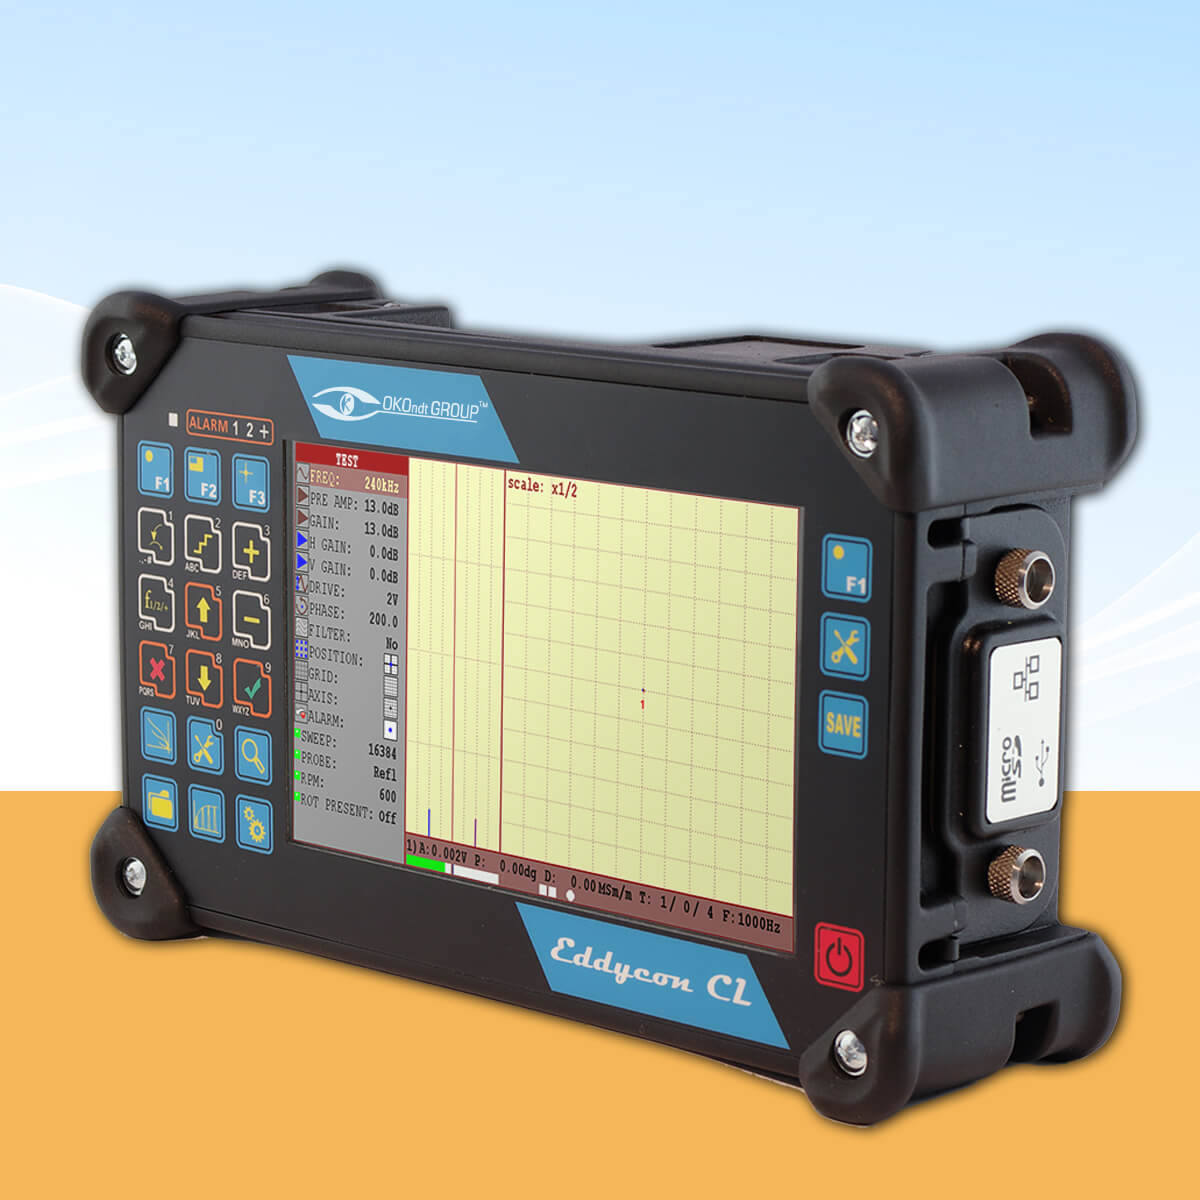 Portable eddy current flaw detector with a large screen Eddycon CL